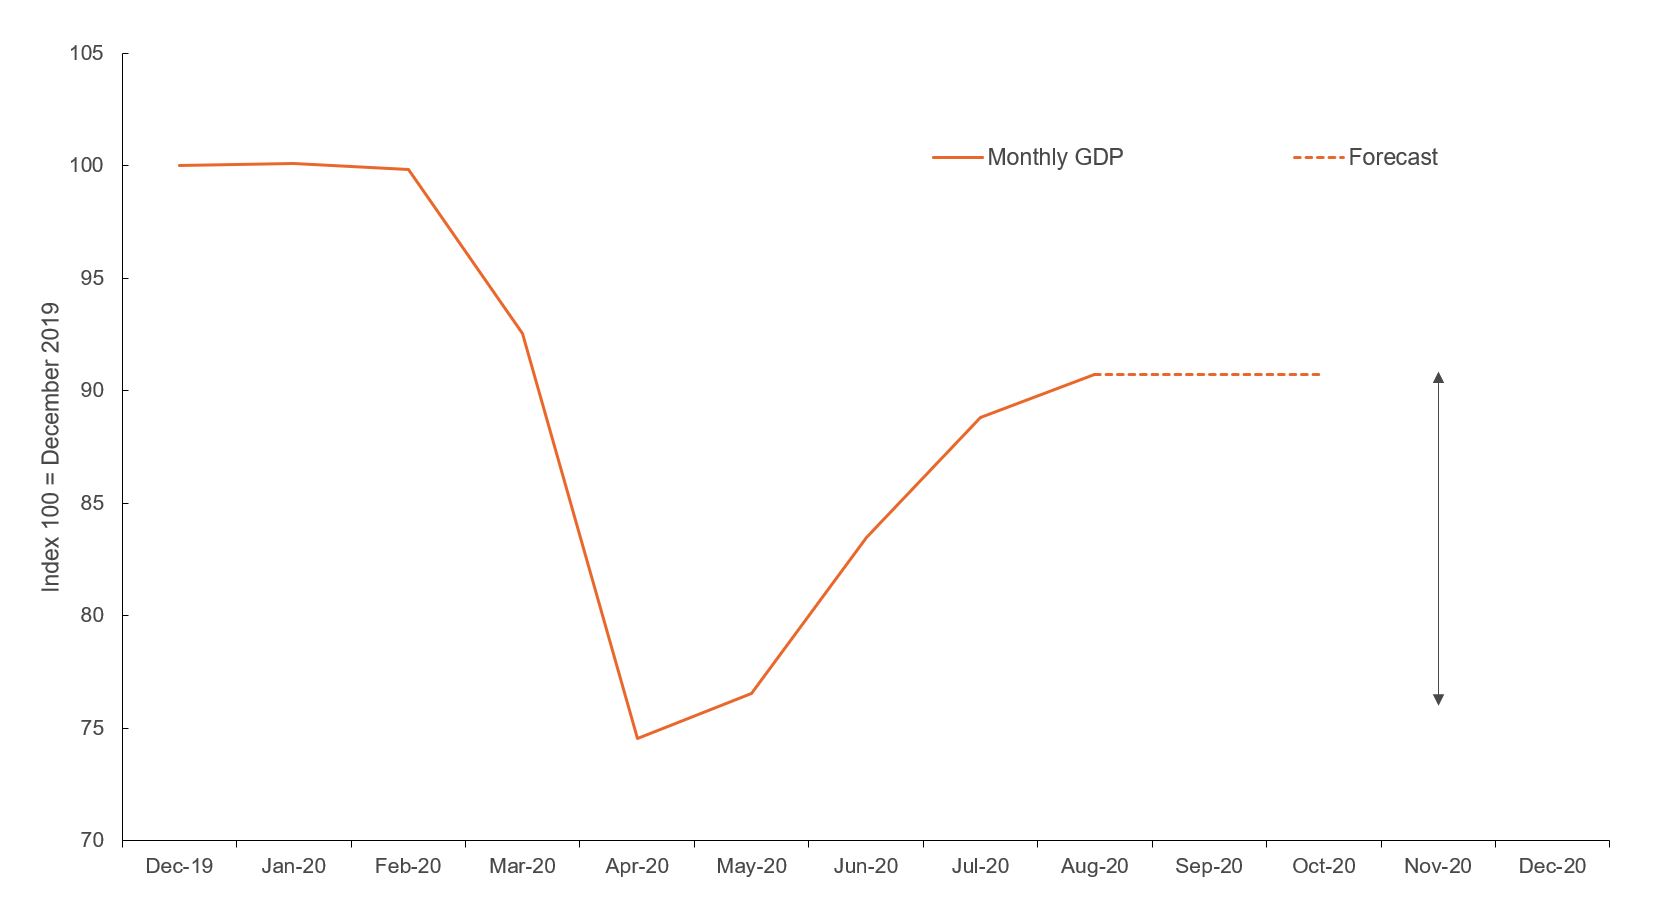 Figure showing monthly GDP